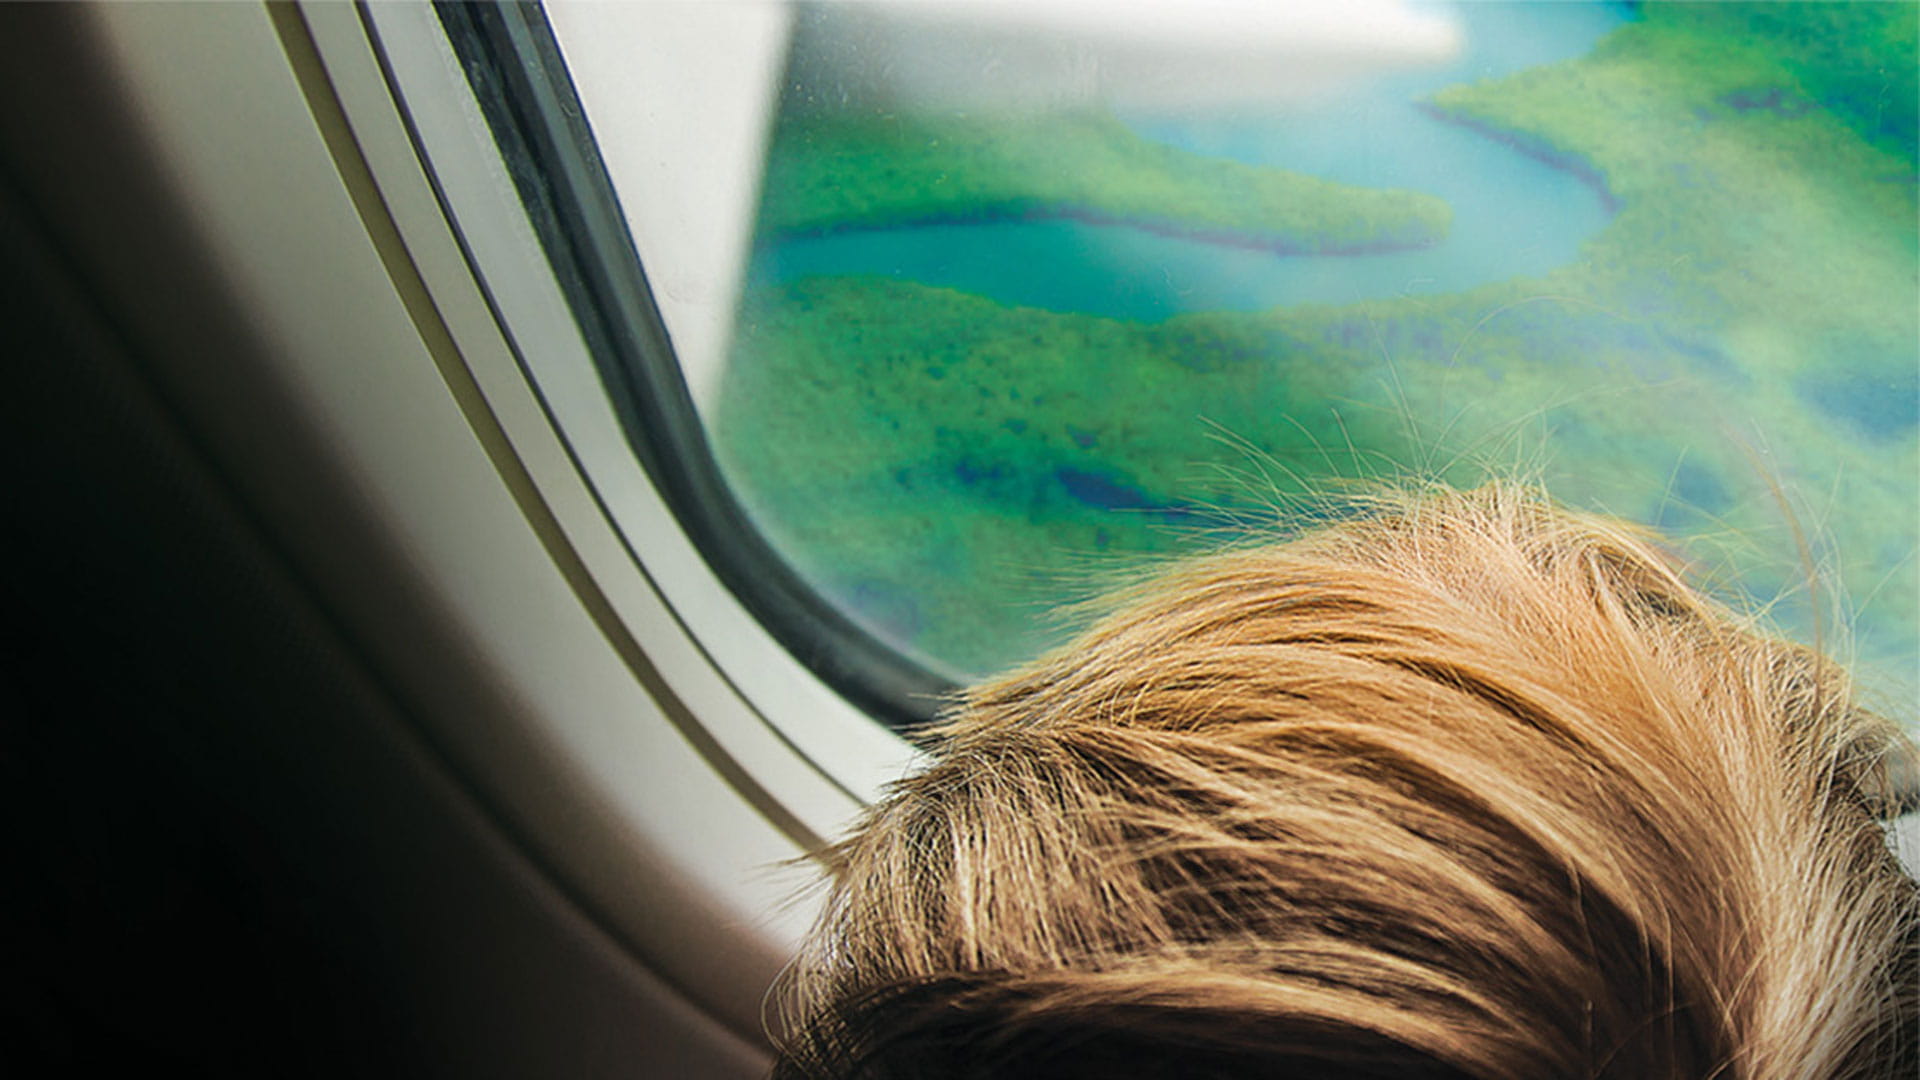 Looking out an airplane window. Image copyright Michelle Stoddard / Offset.com